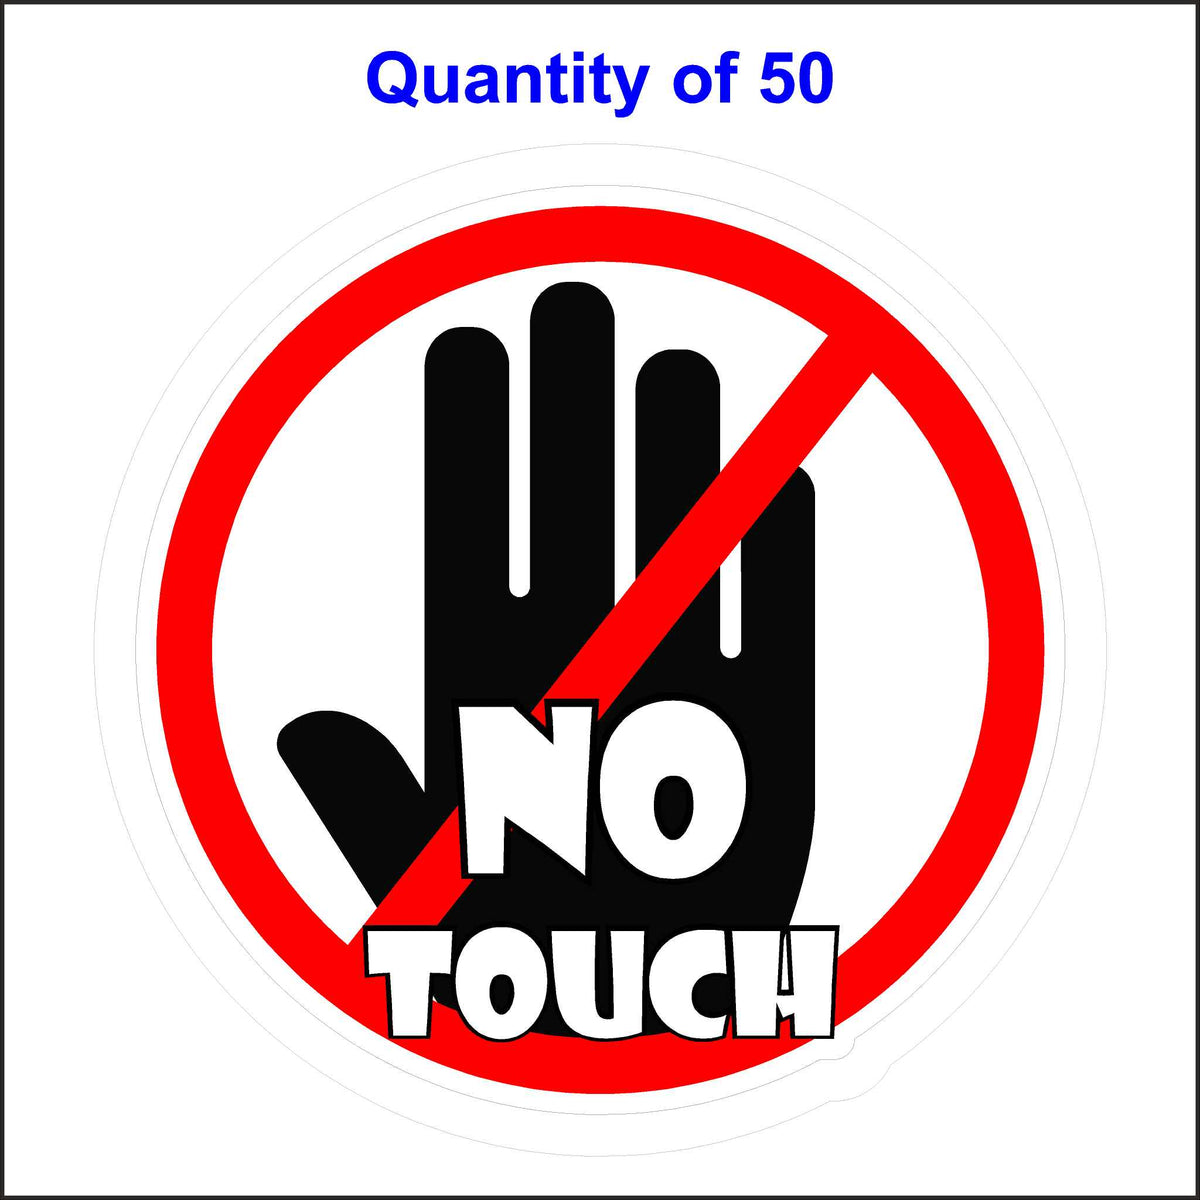 STOP No Touch Sticker. 50 Quantity.